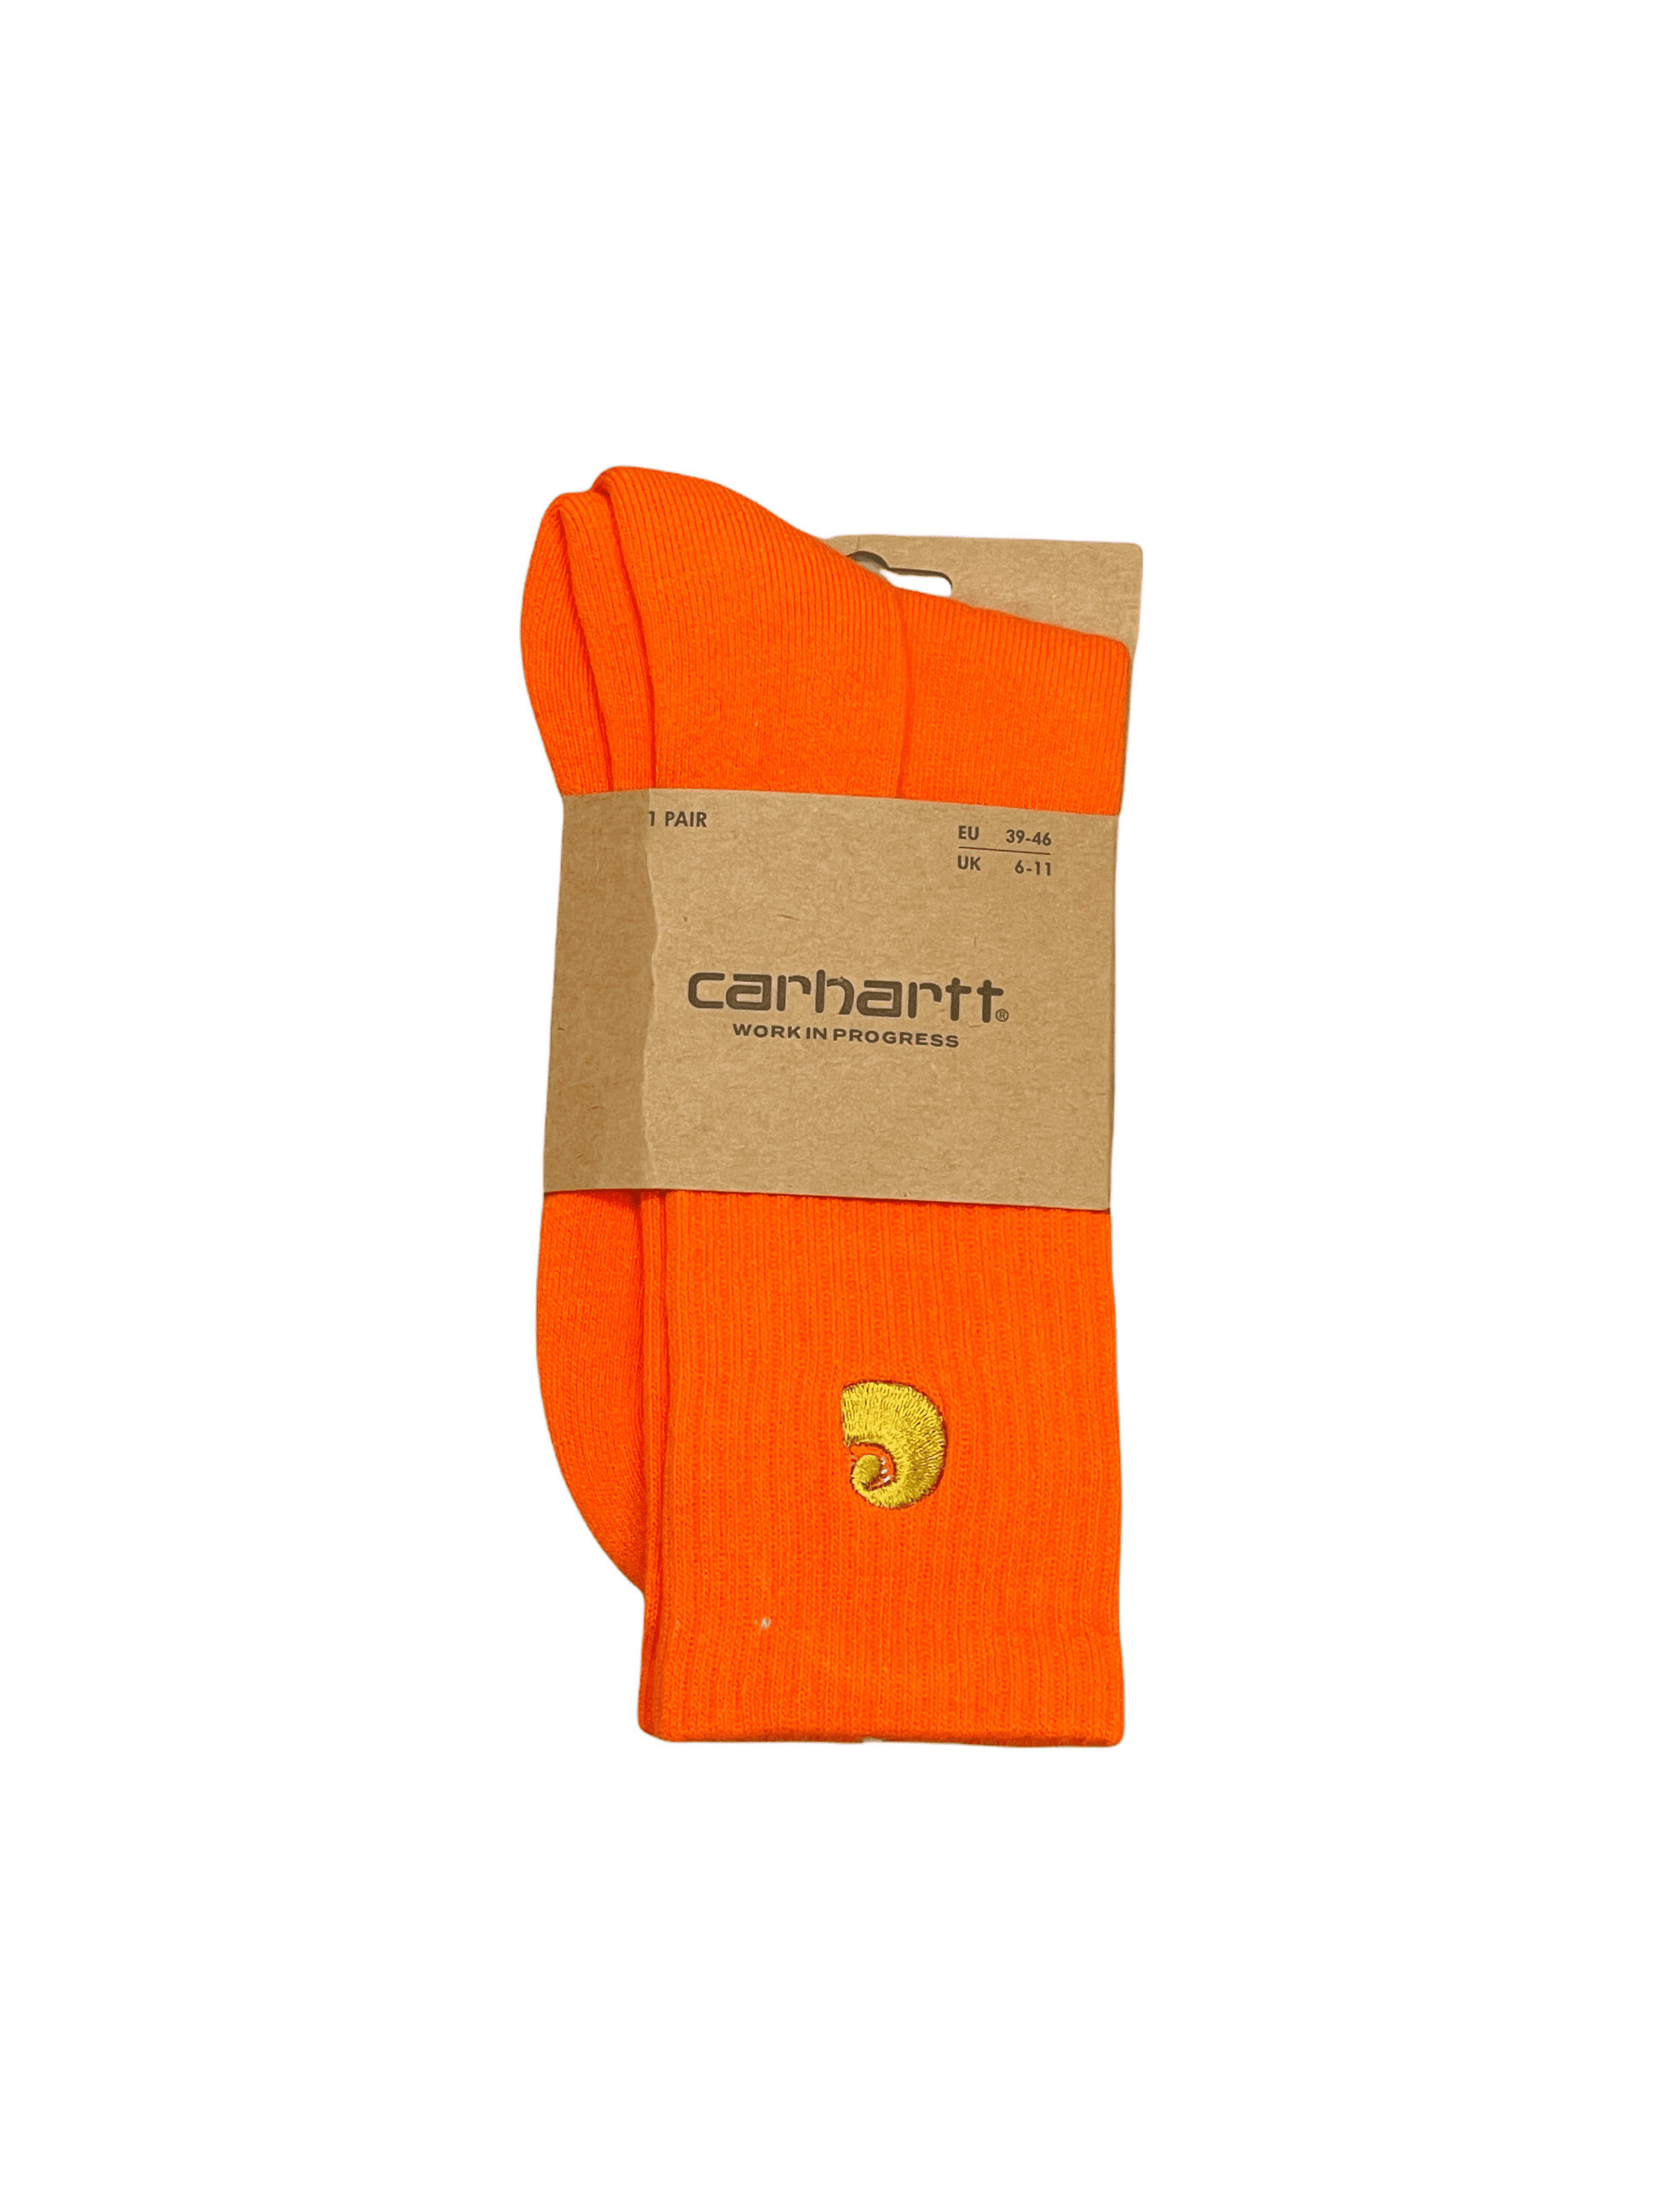 Carhartt WIP Orange Crew Socks M/L - Genuine Design Luxury Consignment for Men. New & Pre-Owned Clothing, Shoes, & Accessories. Calgary, Canada